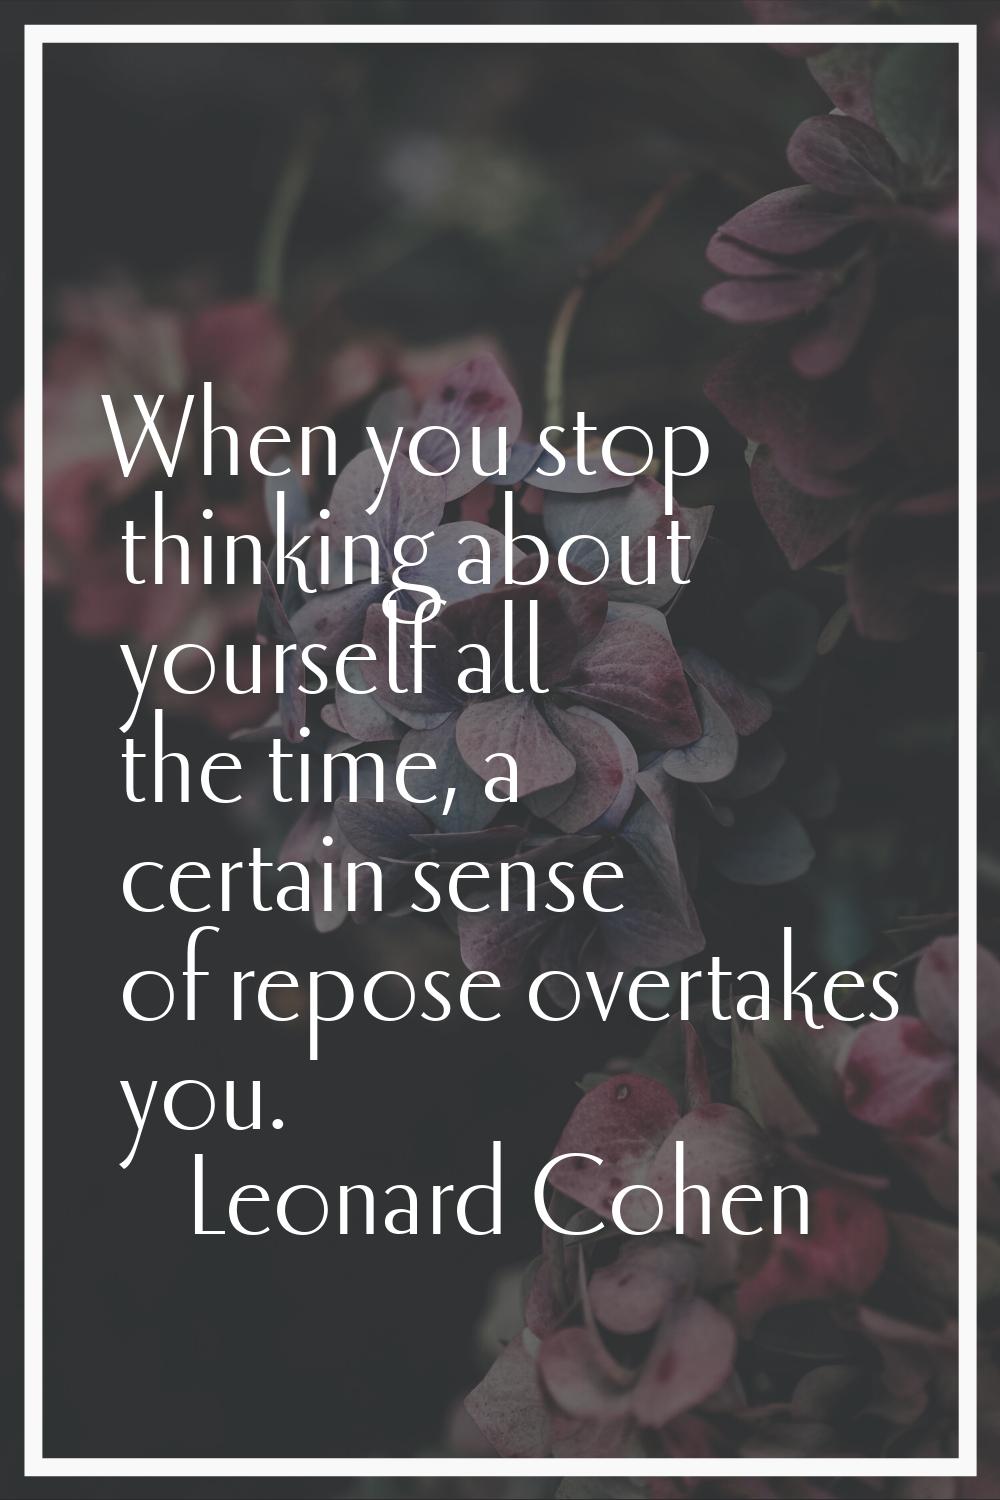 When you stop thinking about yourself all the time, a certain sense of repose overtakes you.